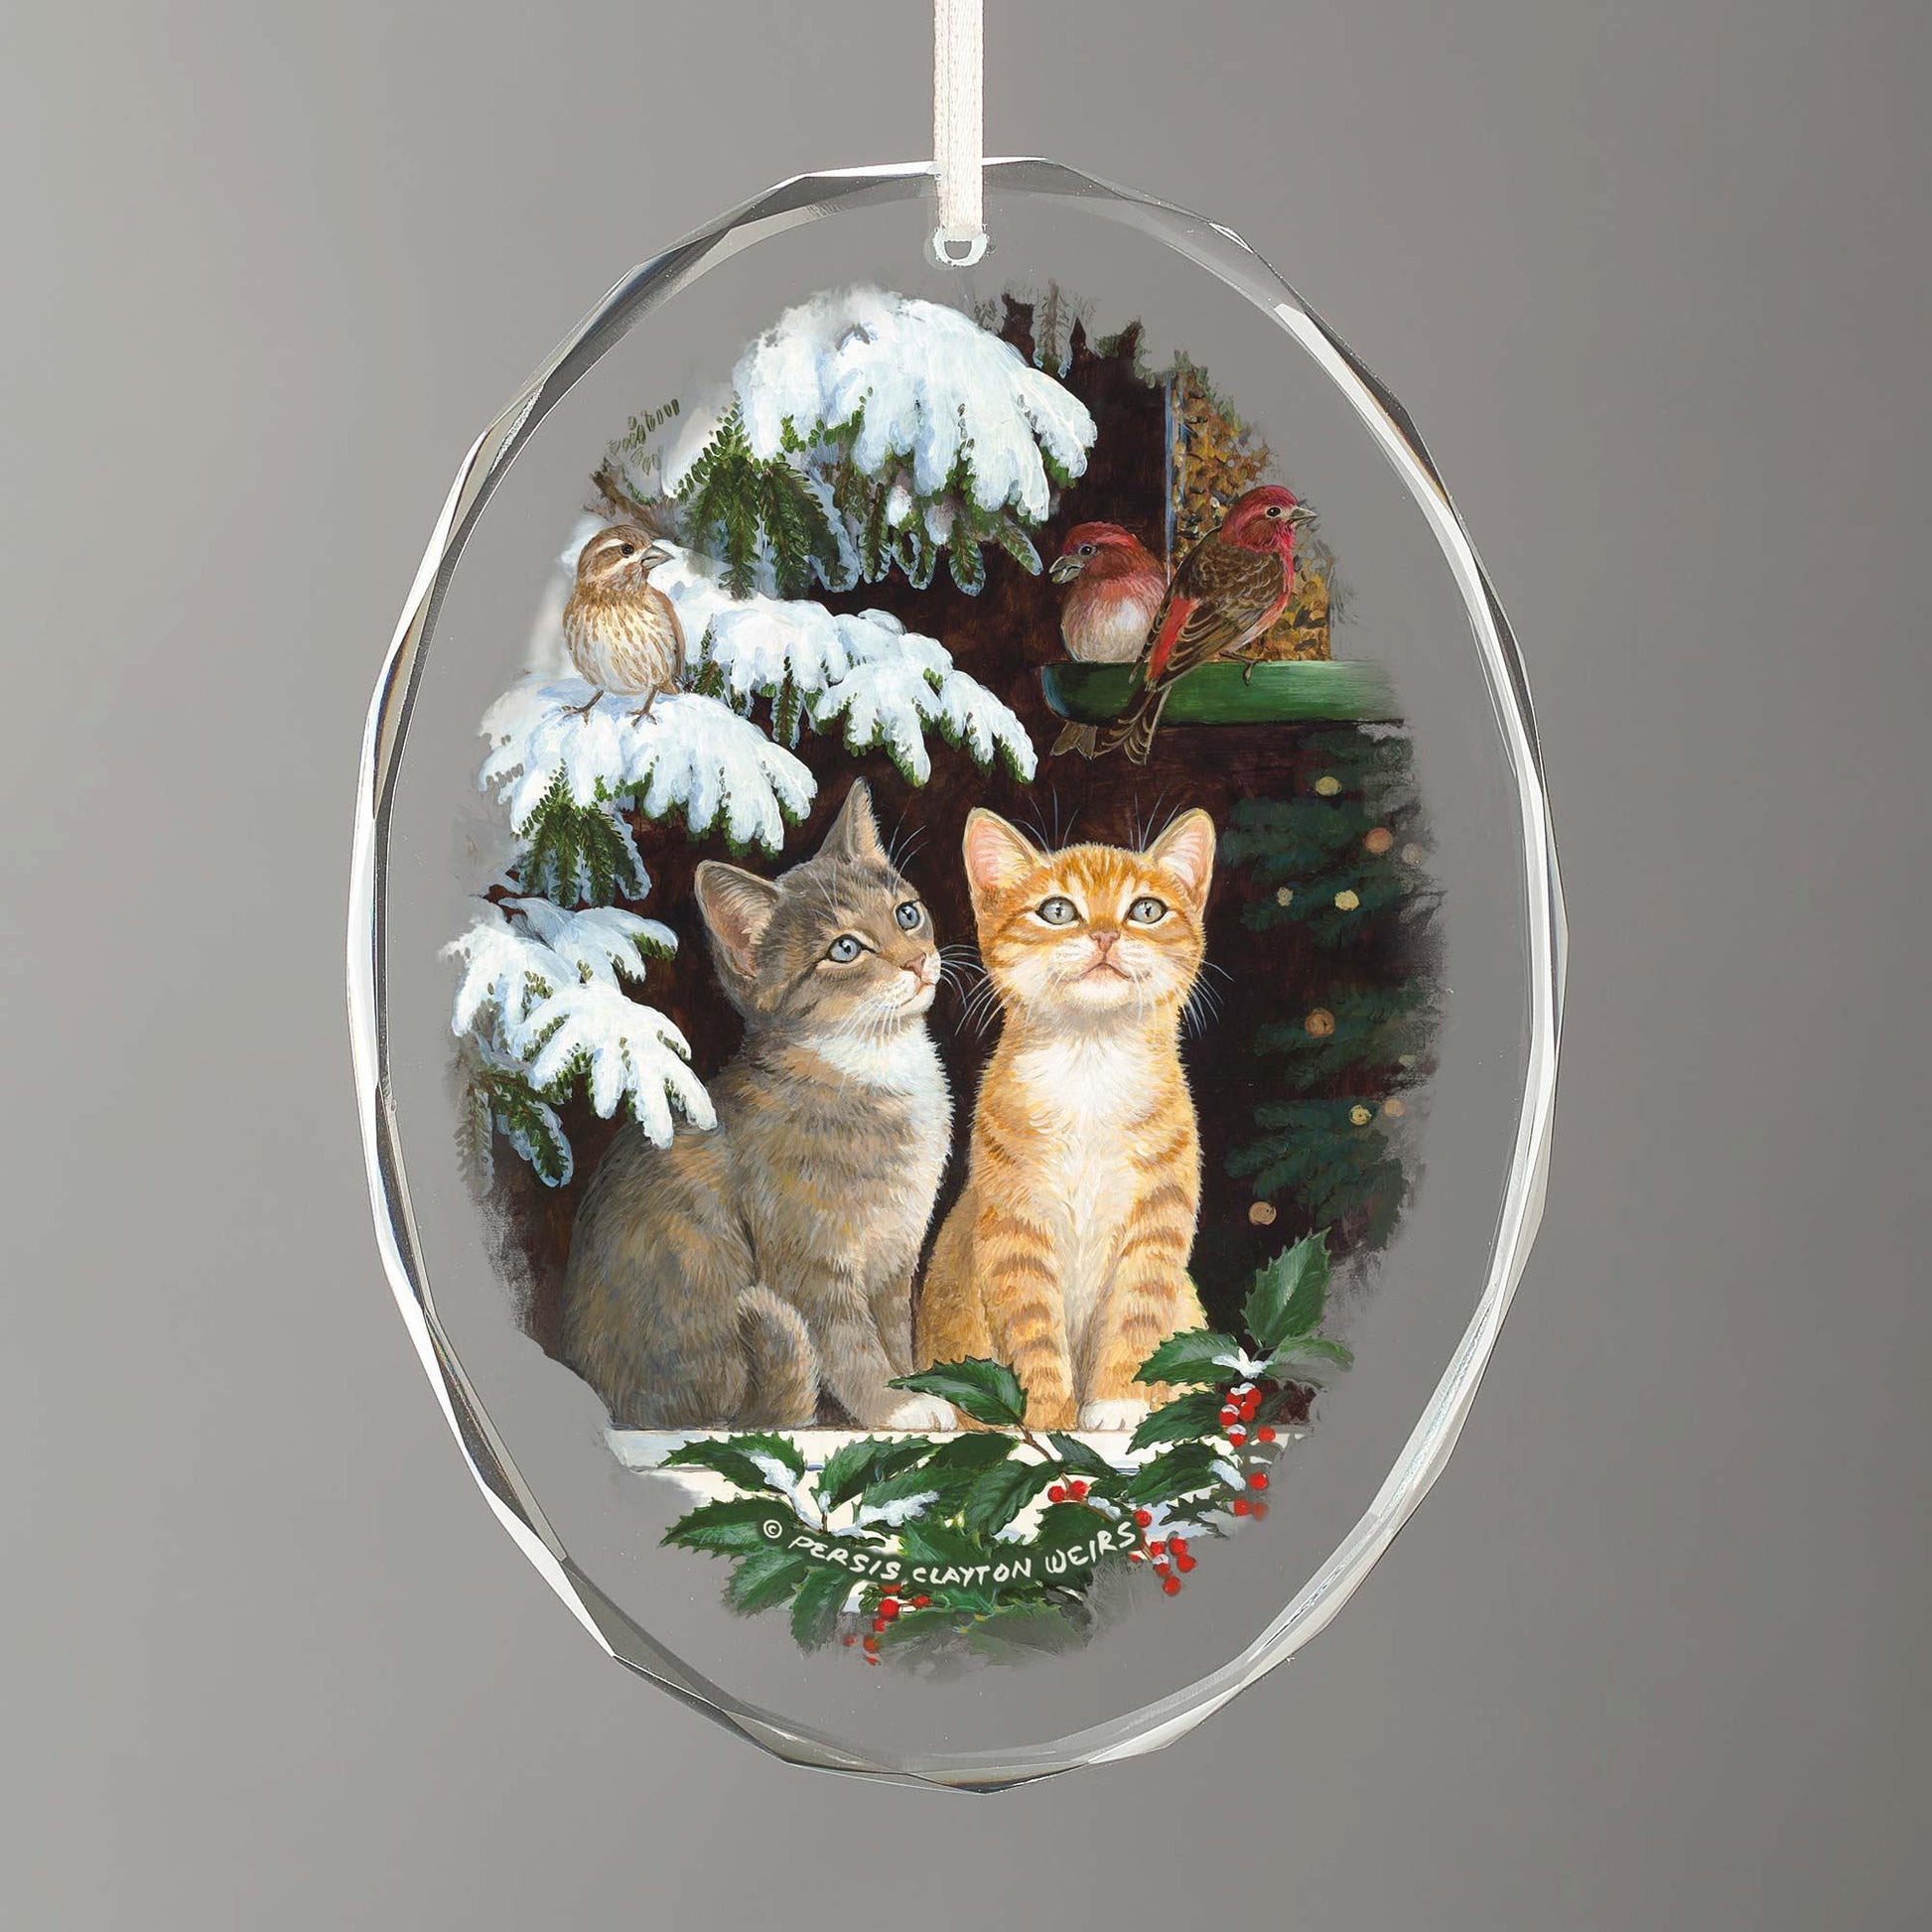 Family & Friends Oval Glass Ornament - Wild Wings